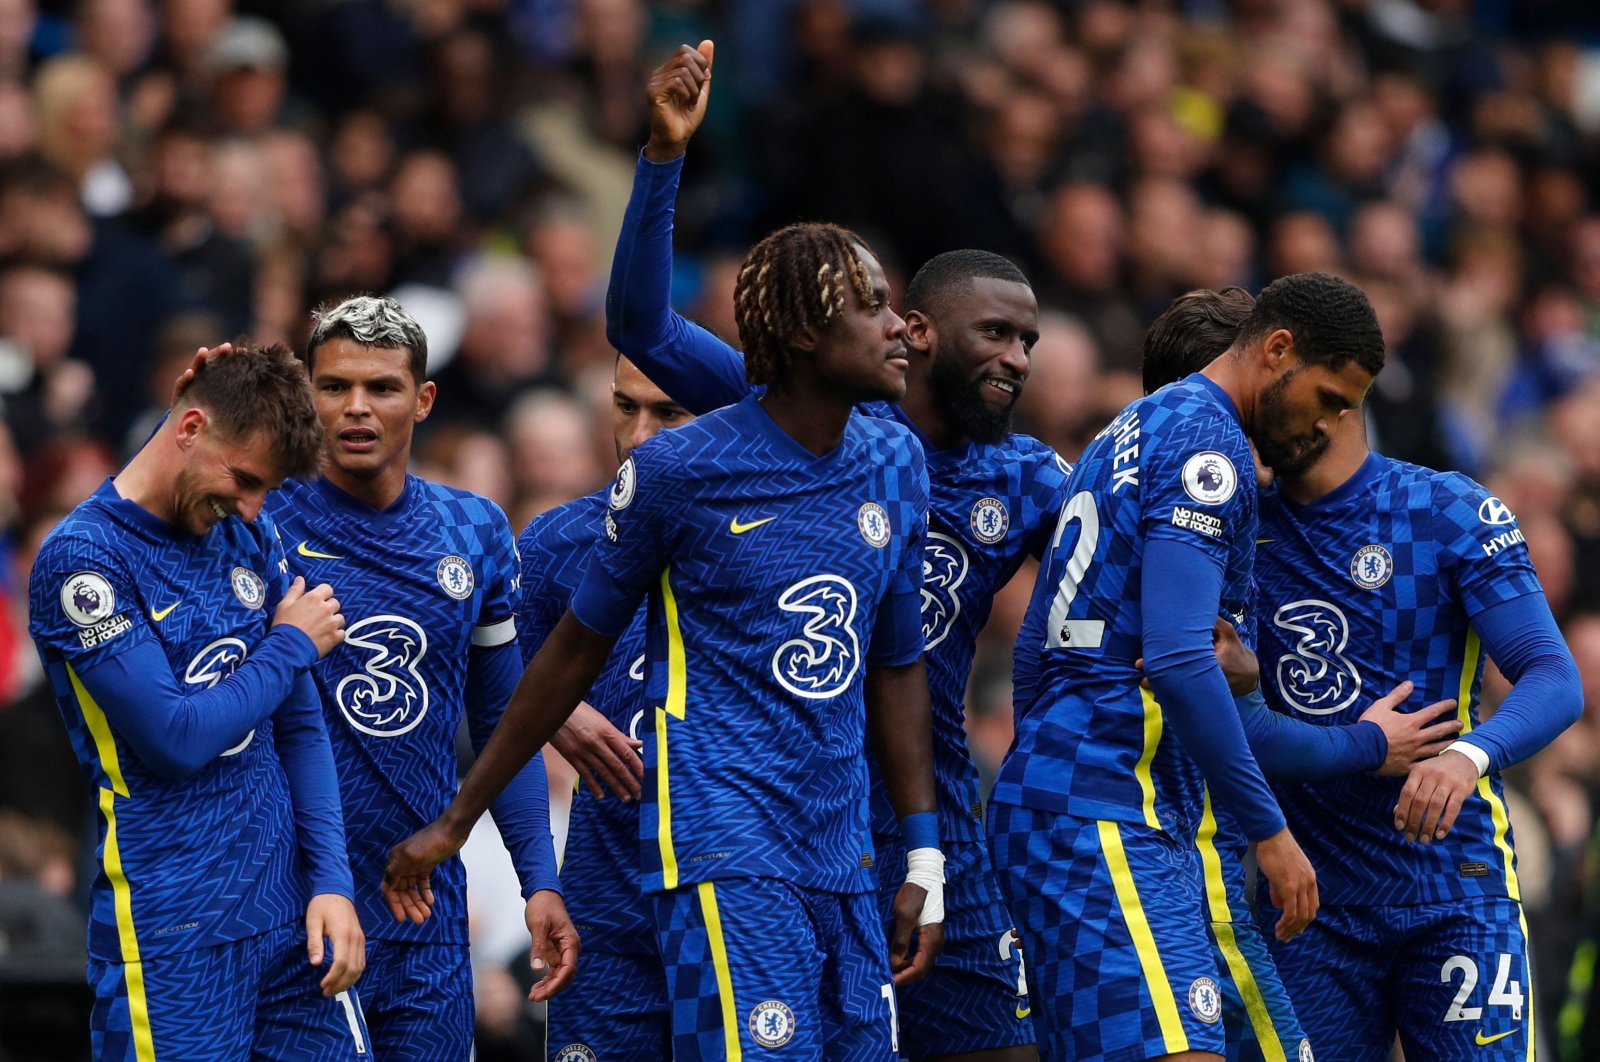 Chelsea's Mason Mount (L) celebrates with teammates after scoring his team's seventh goal during a Premier League match against Norwich City at Stamford Bridge, London, England, Oct. 23, 2021. (AFP Photo)